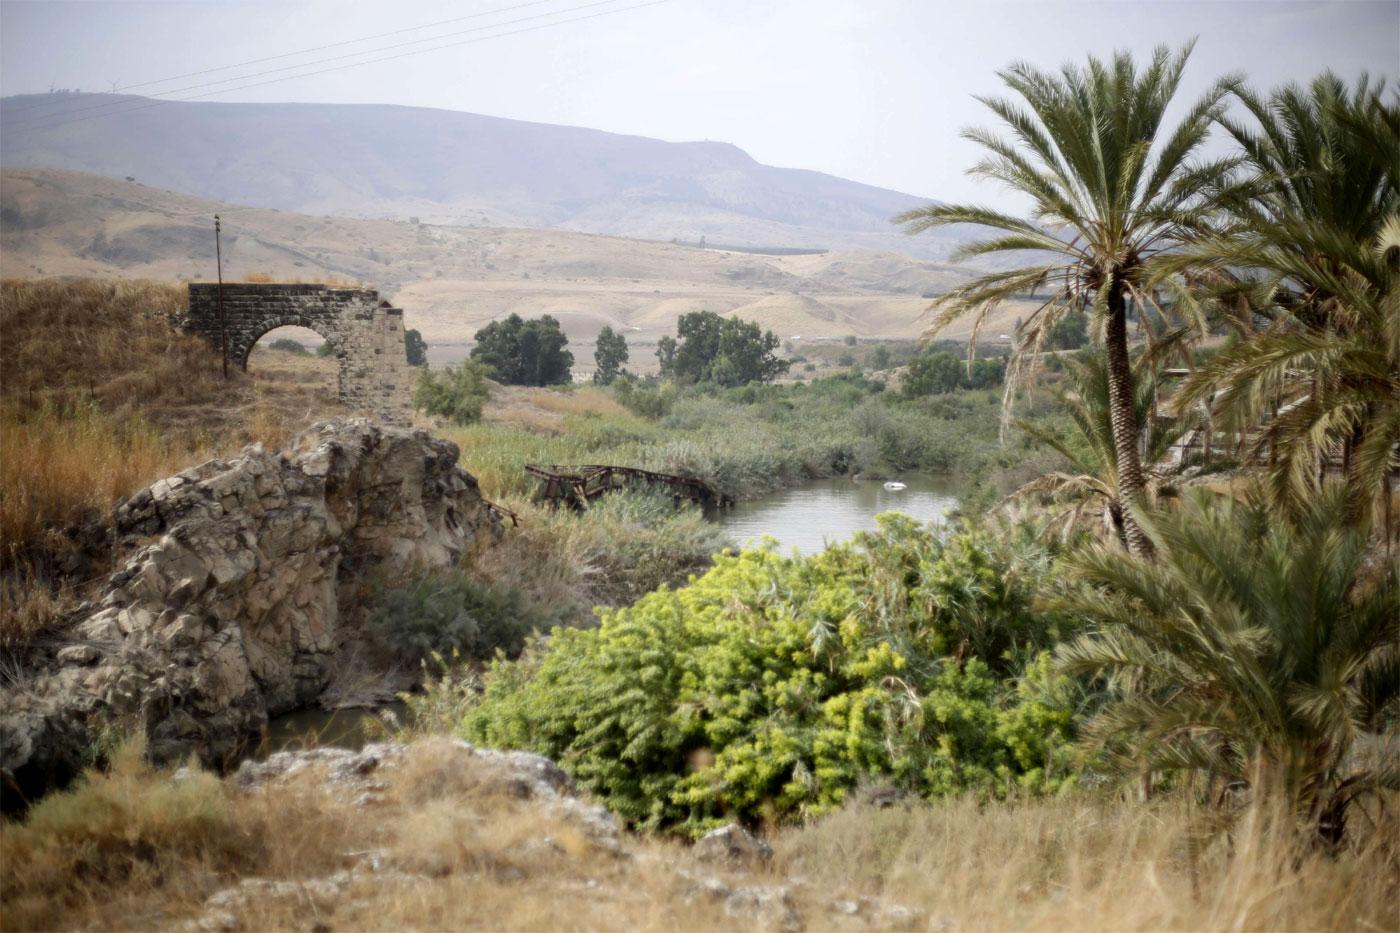 What pushed to reclaim land from Israel? | MEO